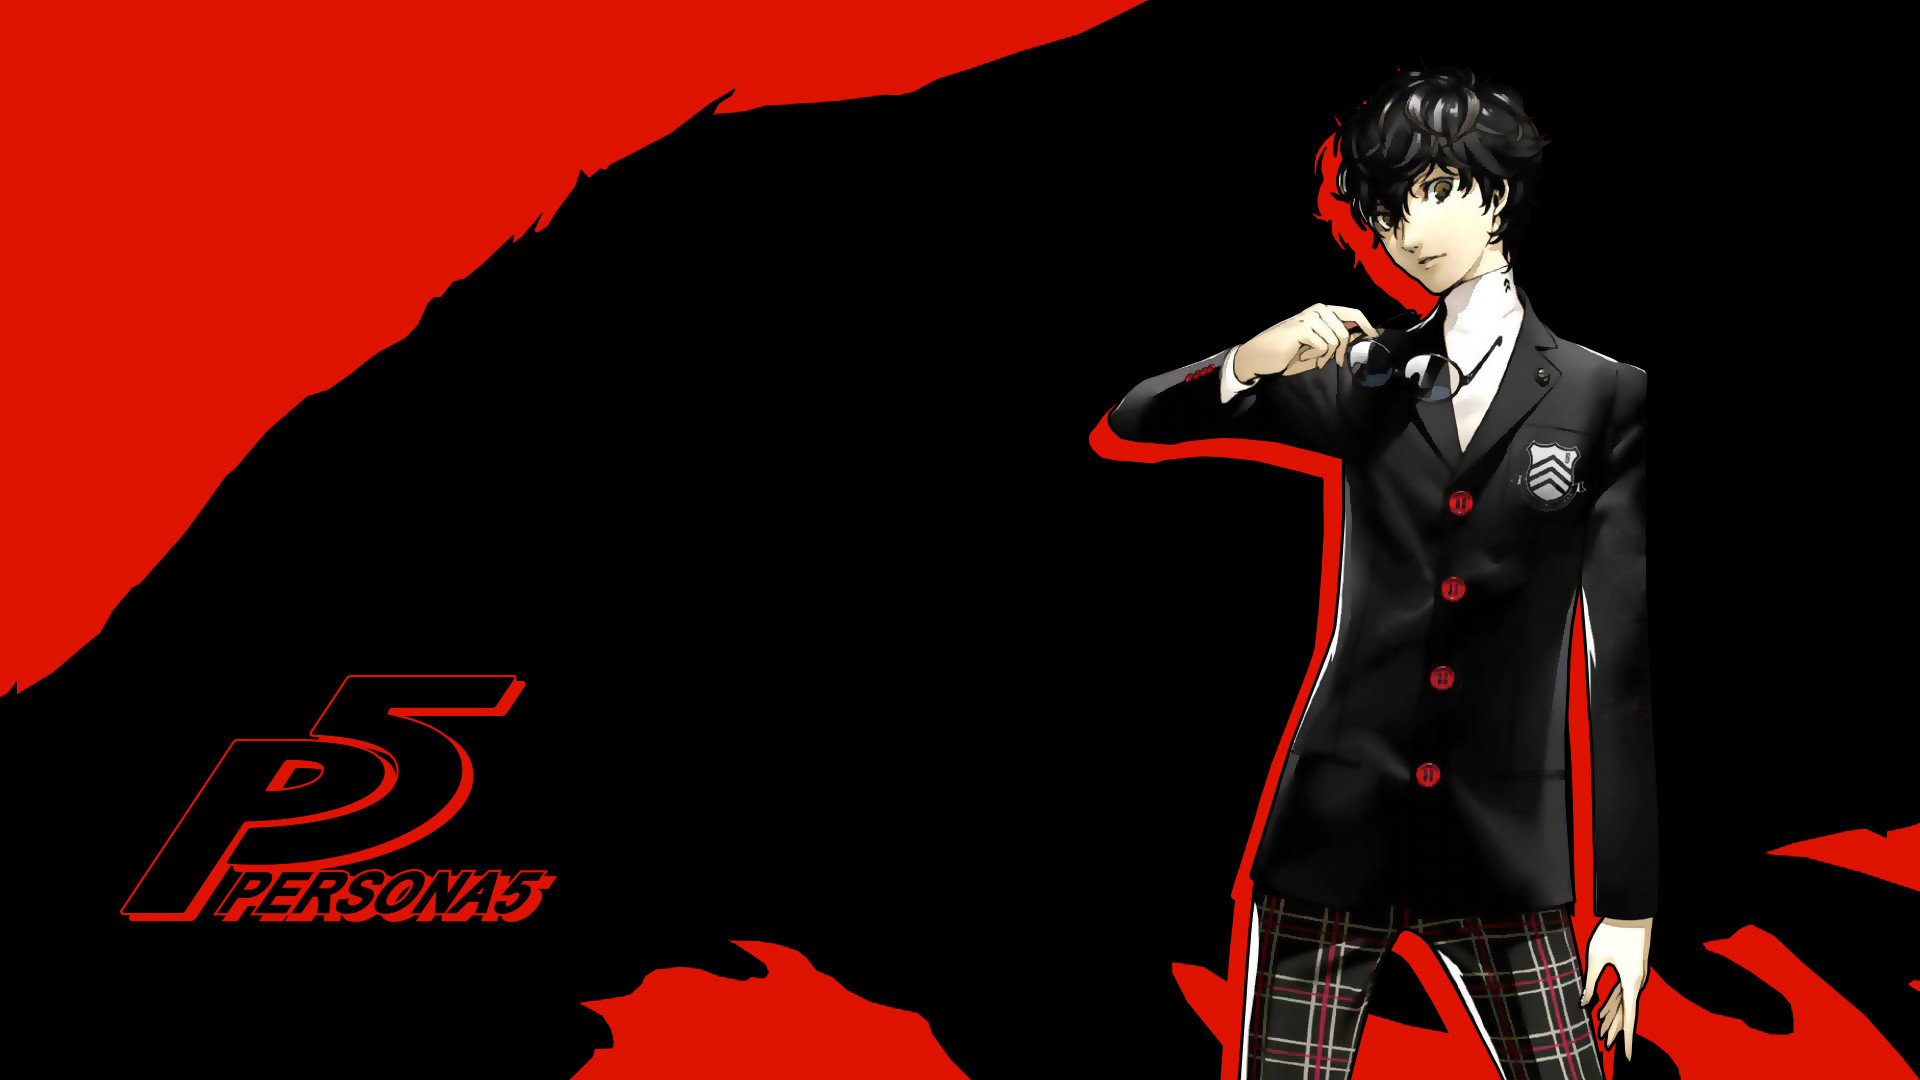 1920x1080 Free Download Persona 3 Fes Photo.